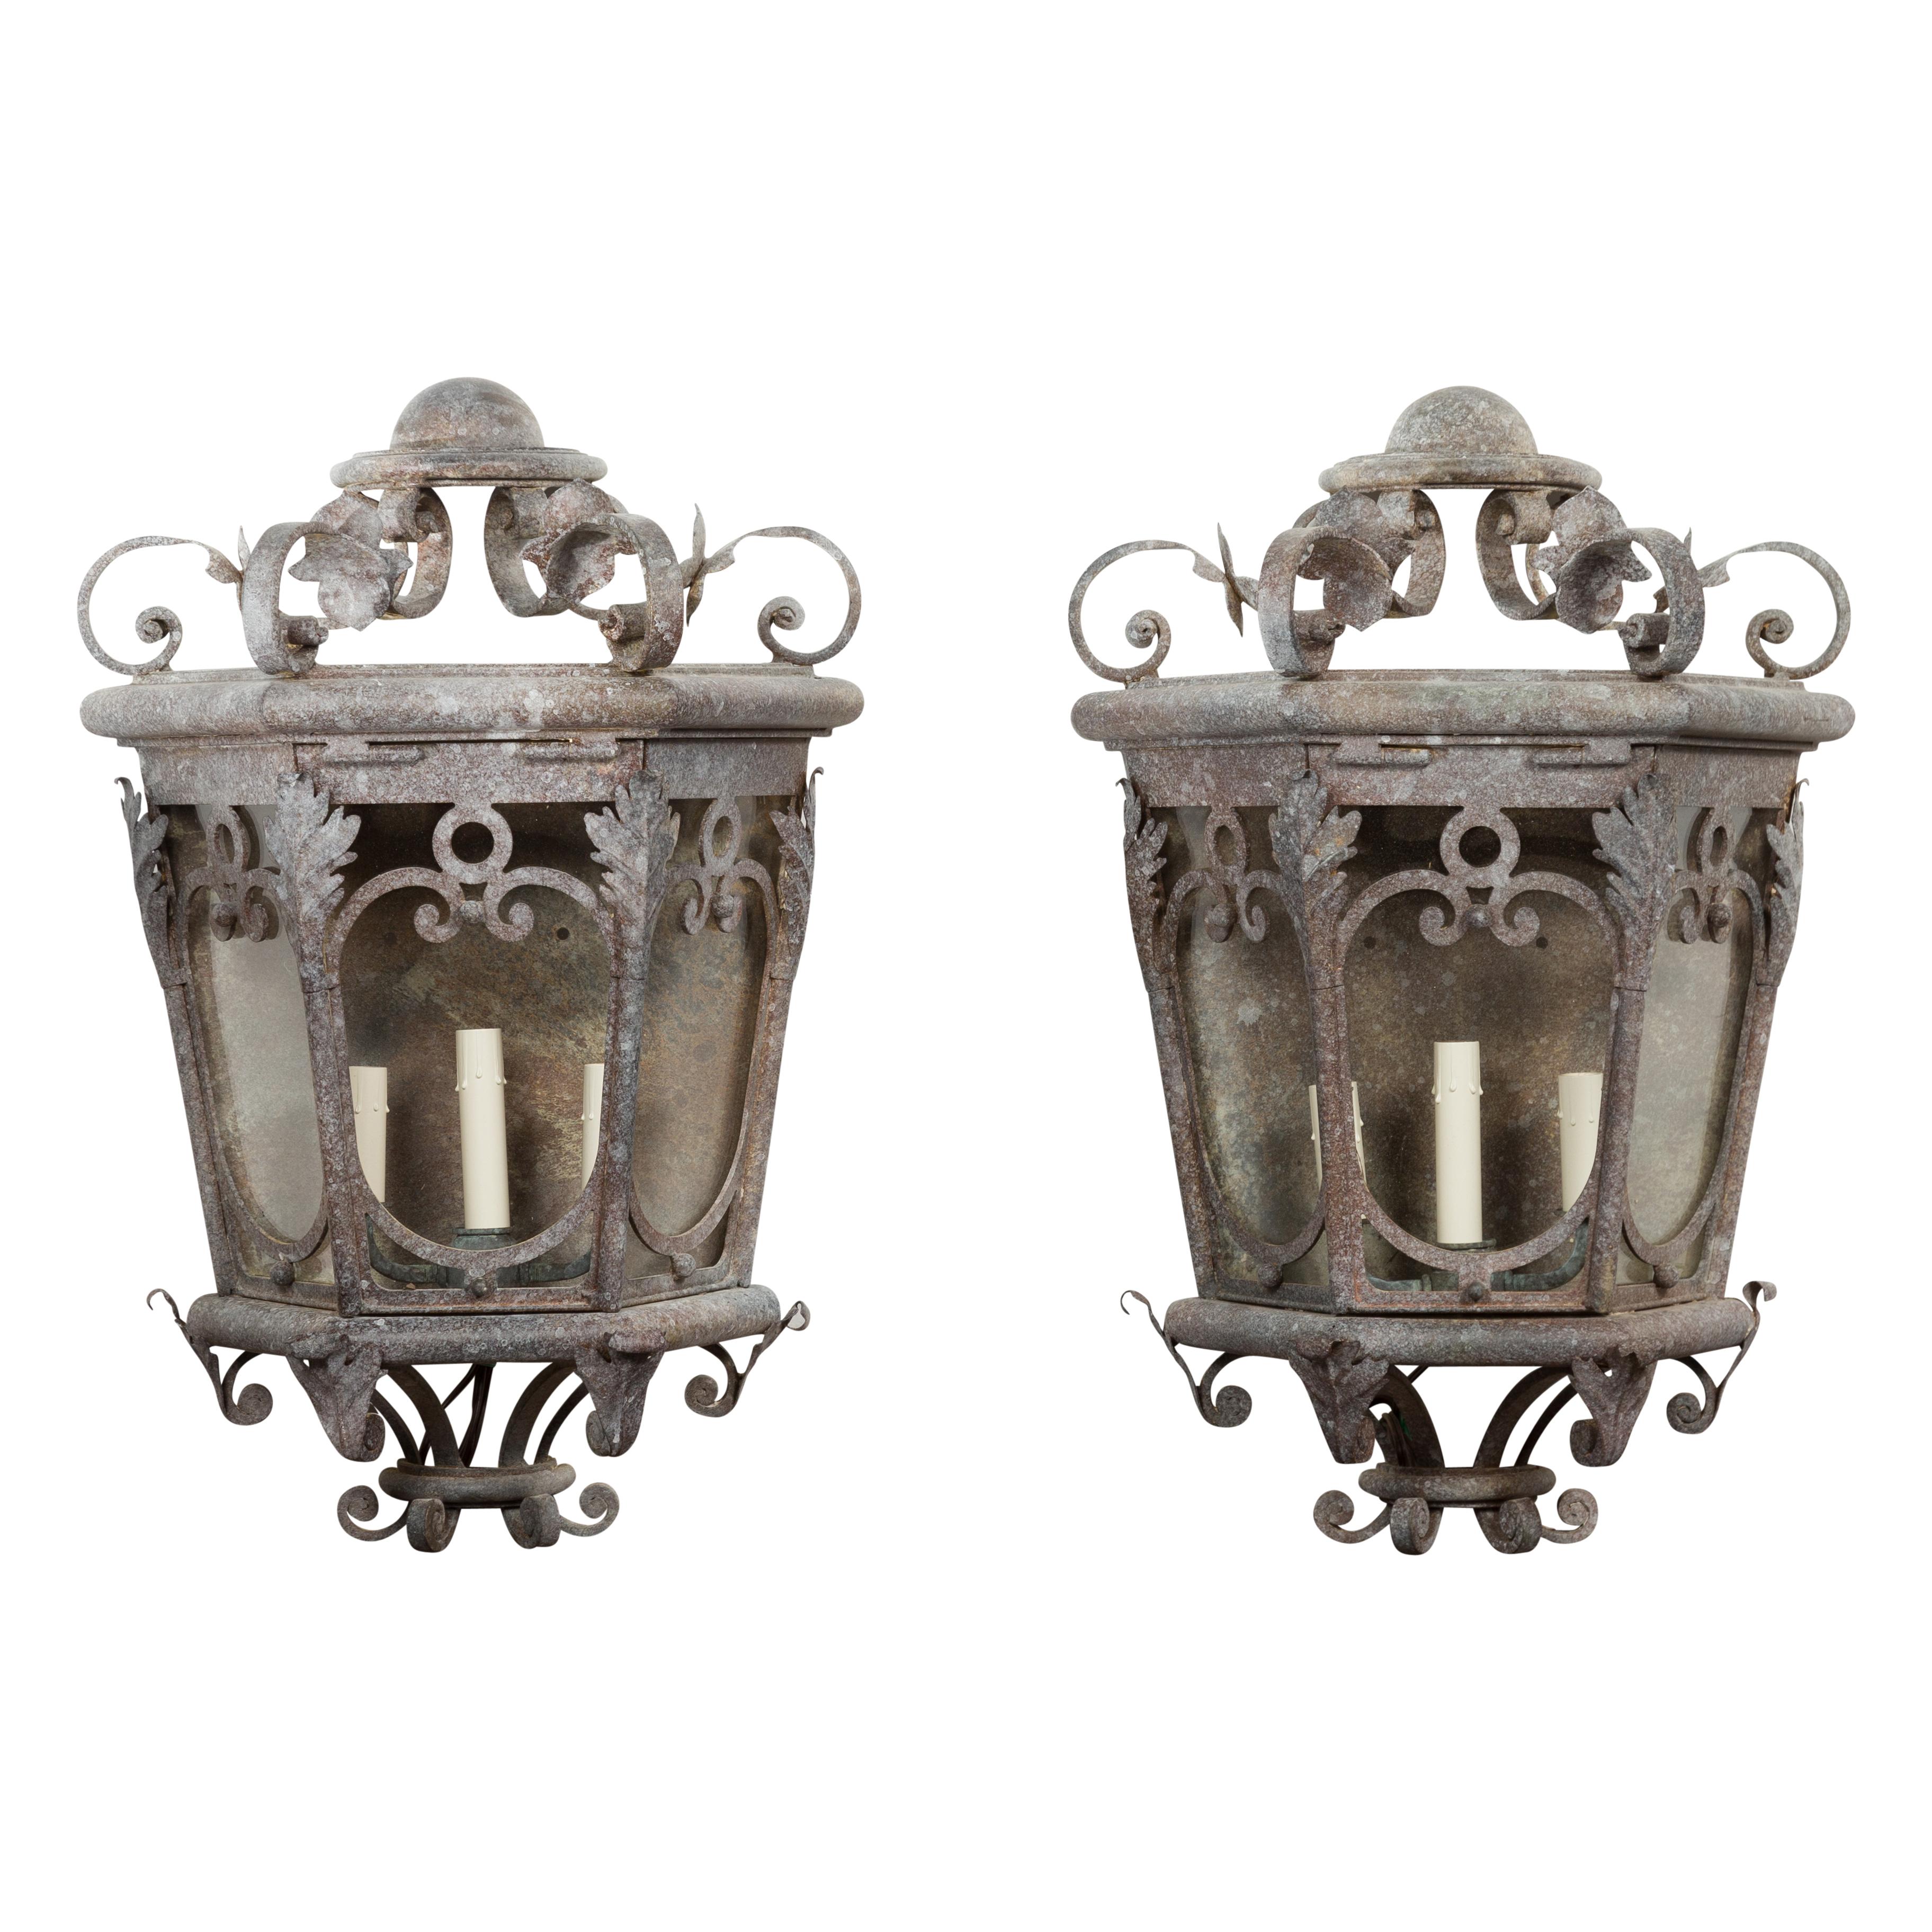 Pair of French 1920s Iron Three-Light Lanterns with Scrolling Motifs and Foliage